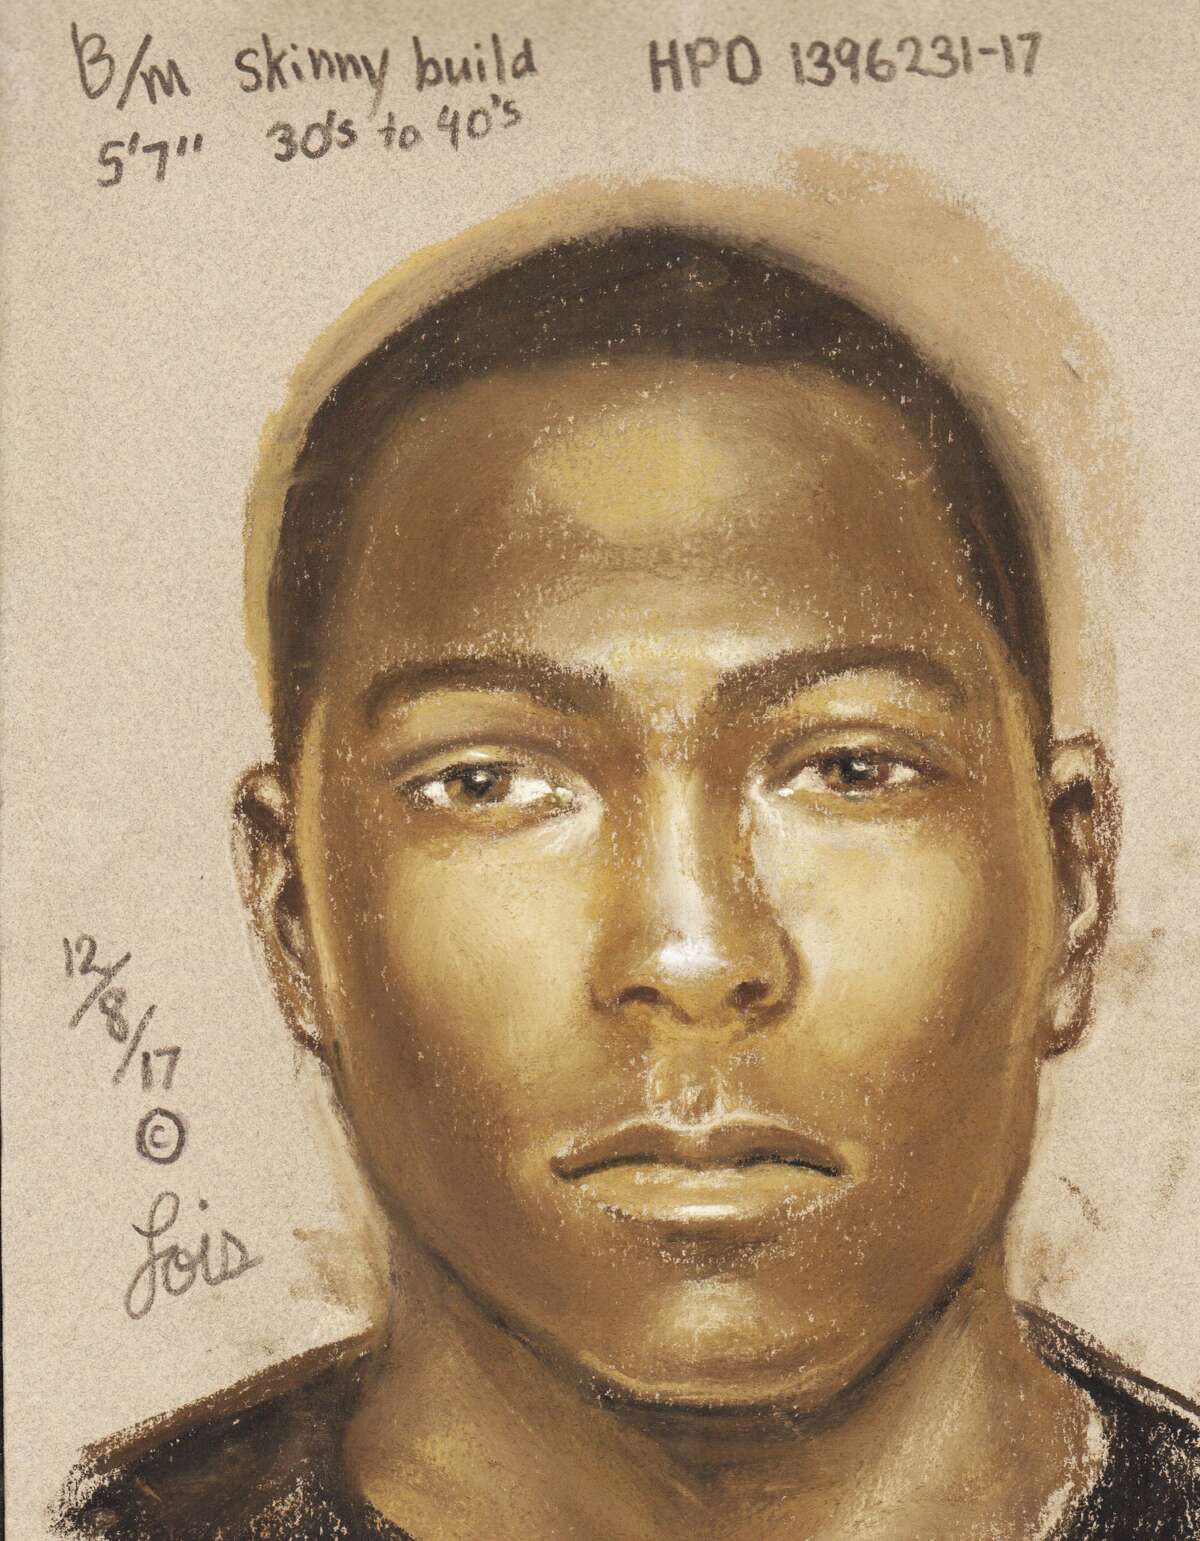 Houston Police have released a sketch of a suspect in the November 5 rape of a woman at a north Houston apartment complex. Around 5 a.m., the man grabbed the victim and forced her into a dark alley at an apartment complex in the 13500 block of Northborough Drive, police said.